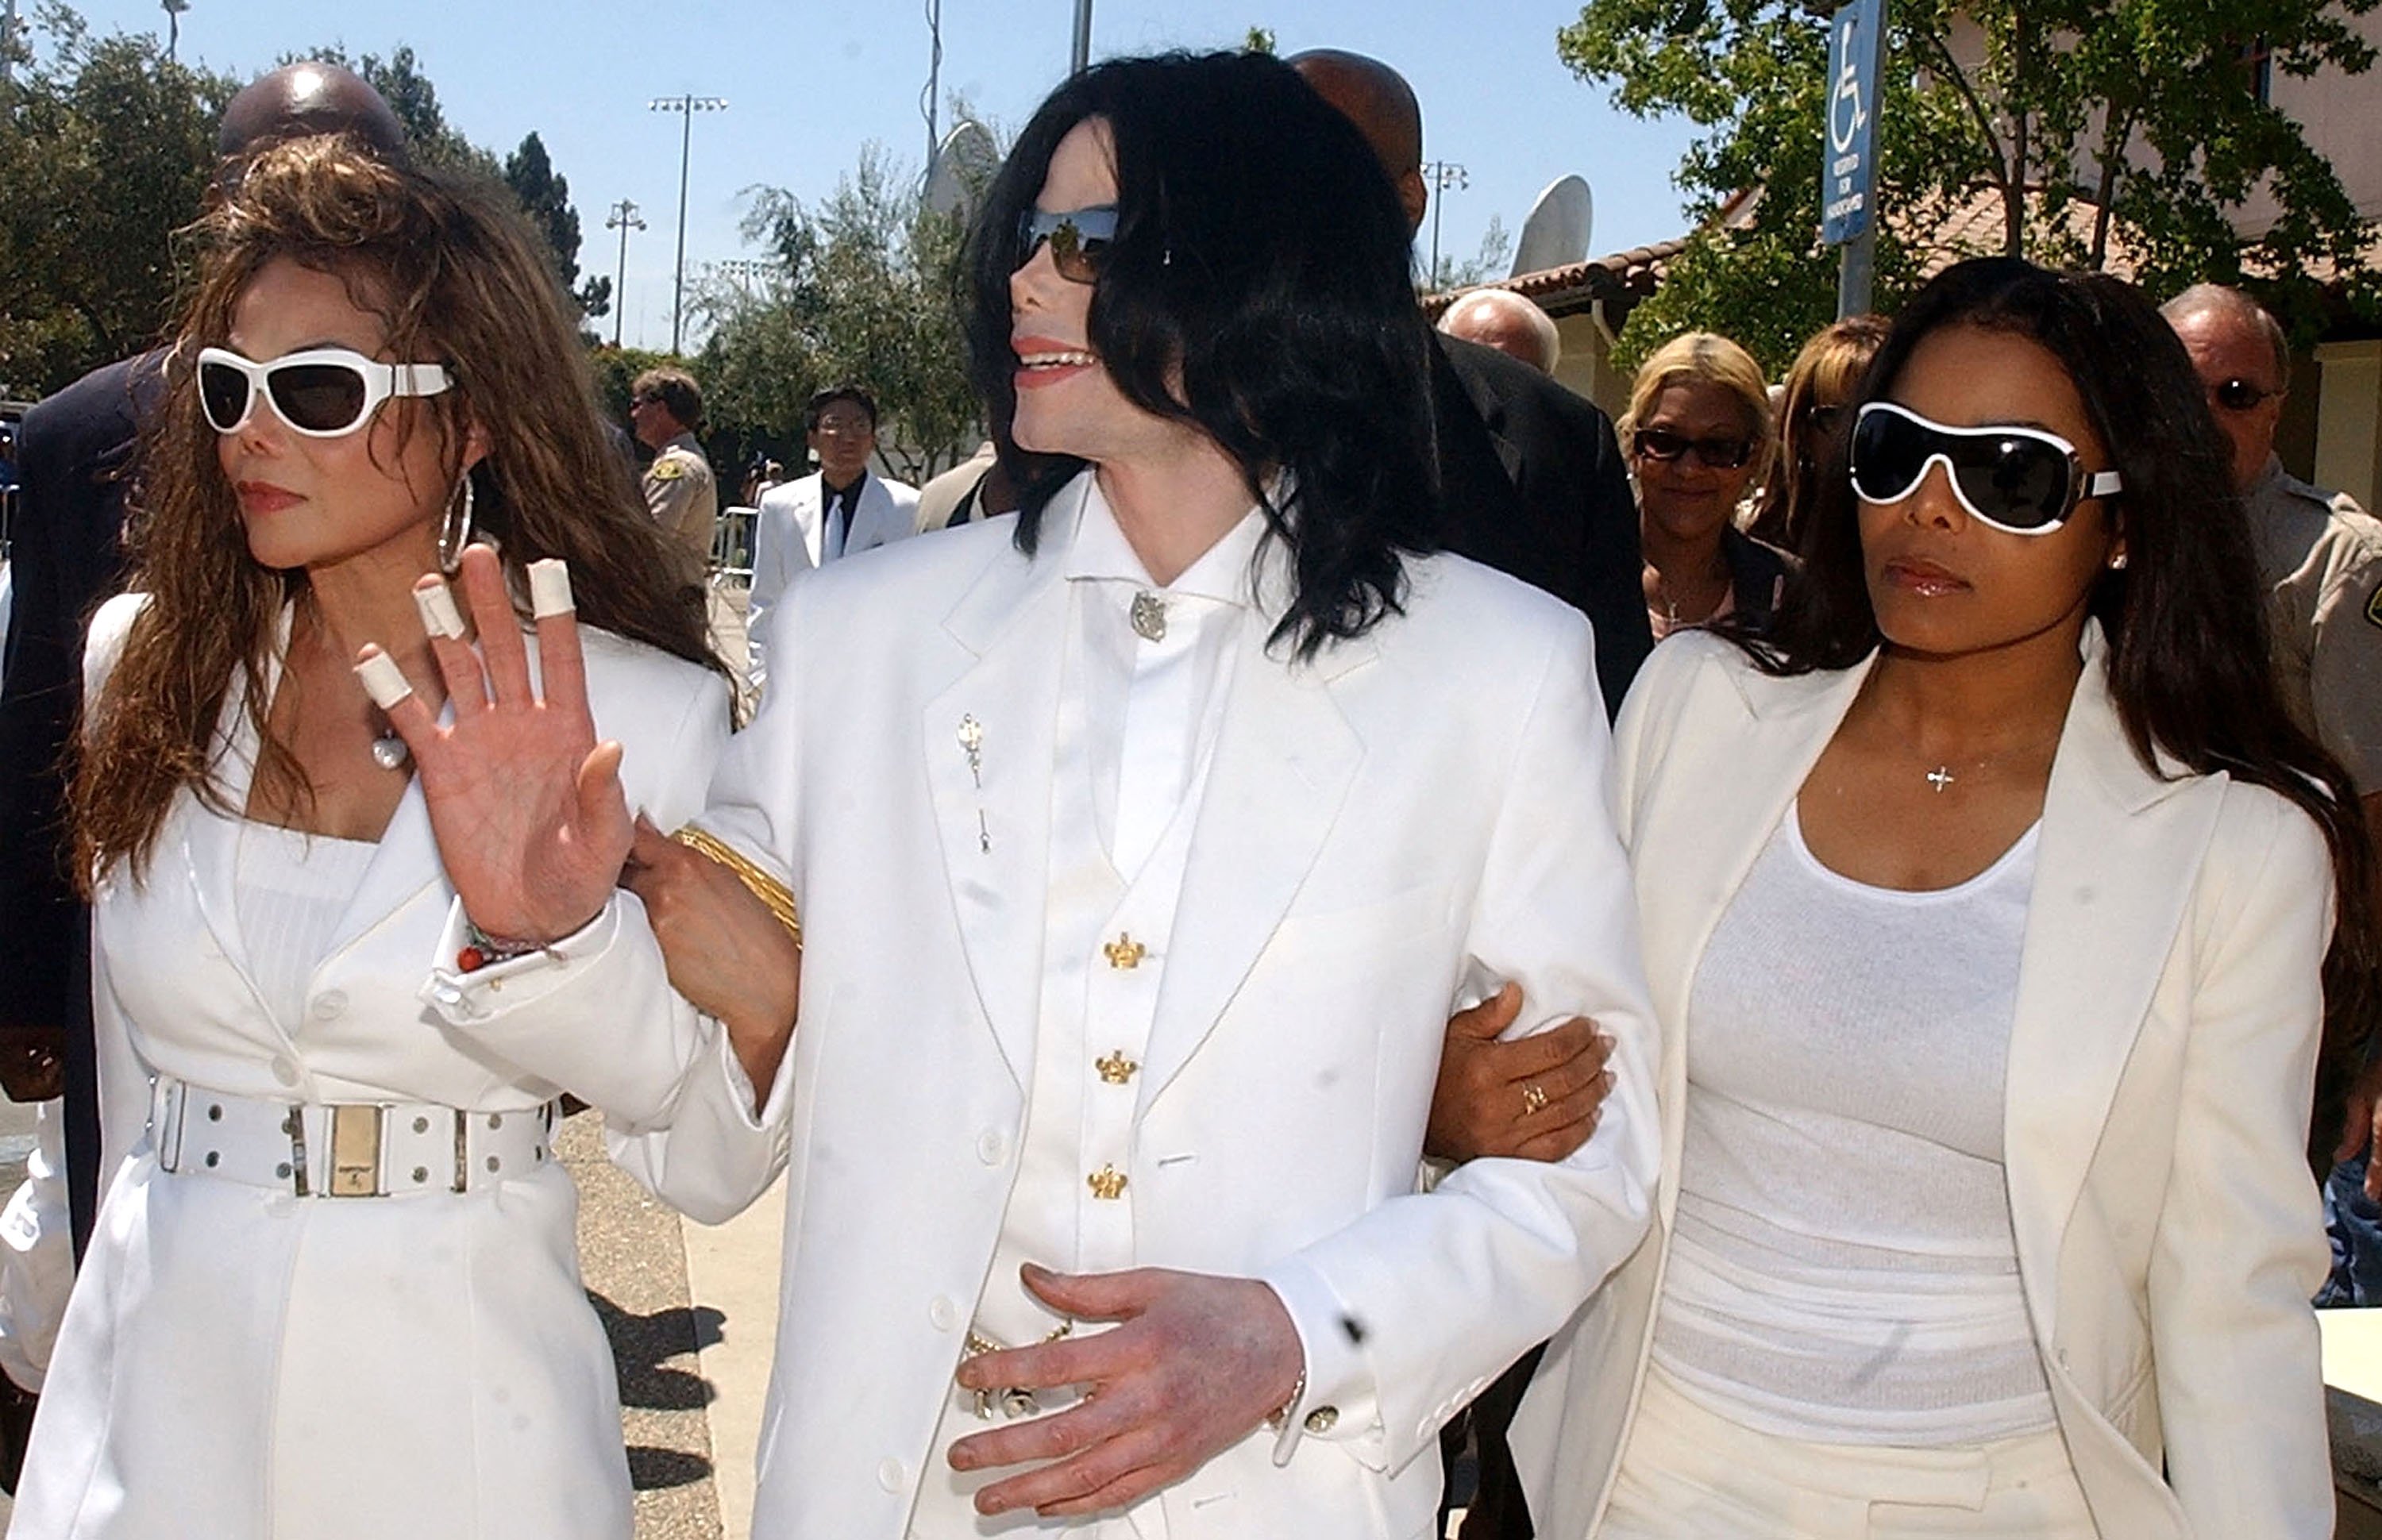 Michael Jackson with sisters LaToya Jackson and Janet Jackson at the Santa Maria courthouse on August 16, 2004 in Santa Maria, California. | Source: Getty Images